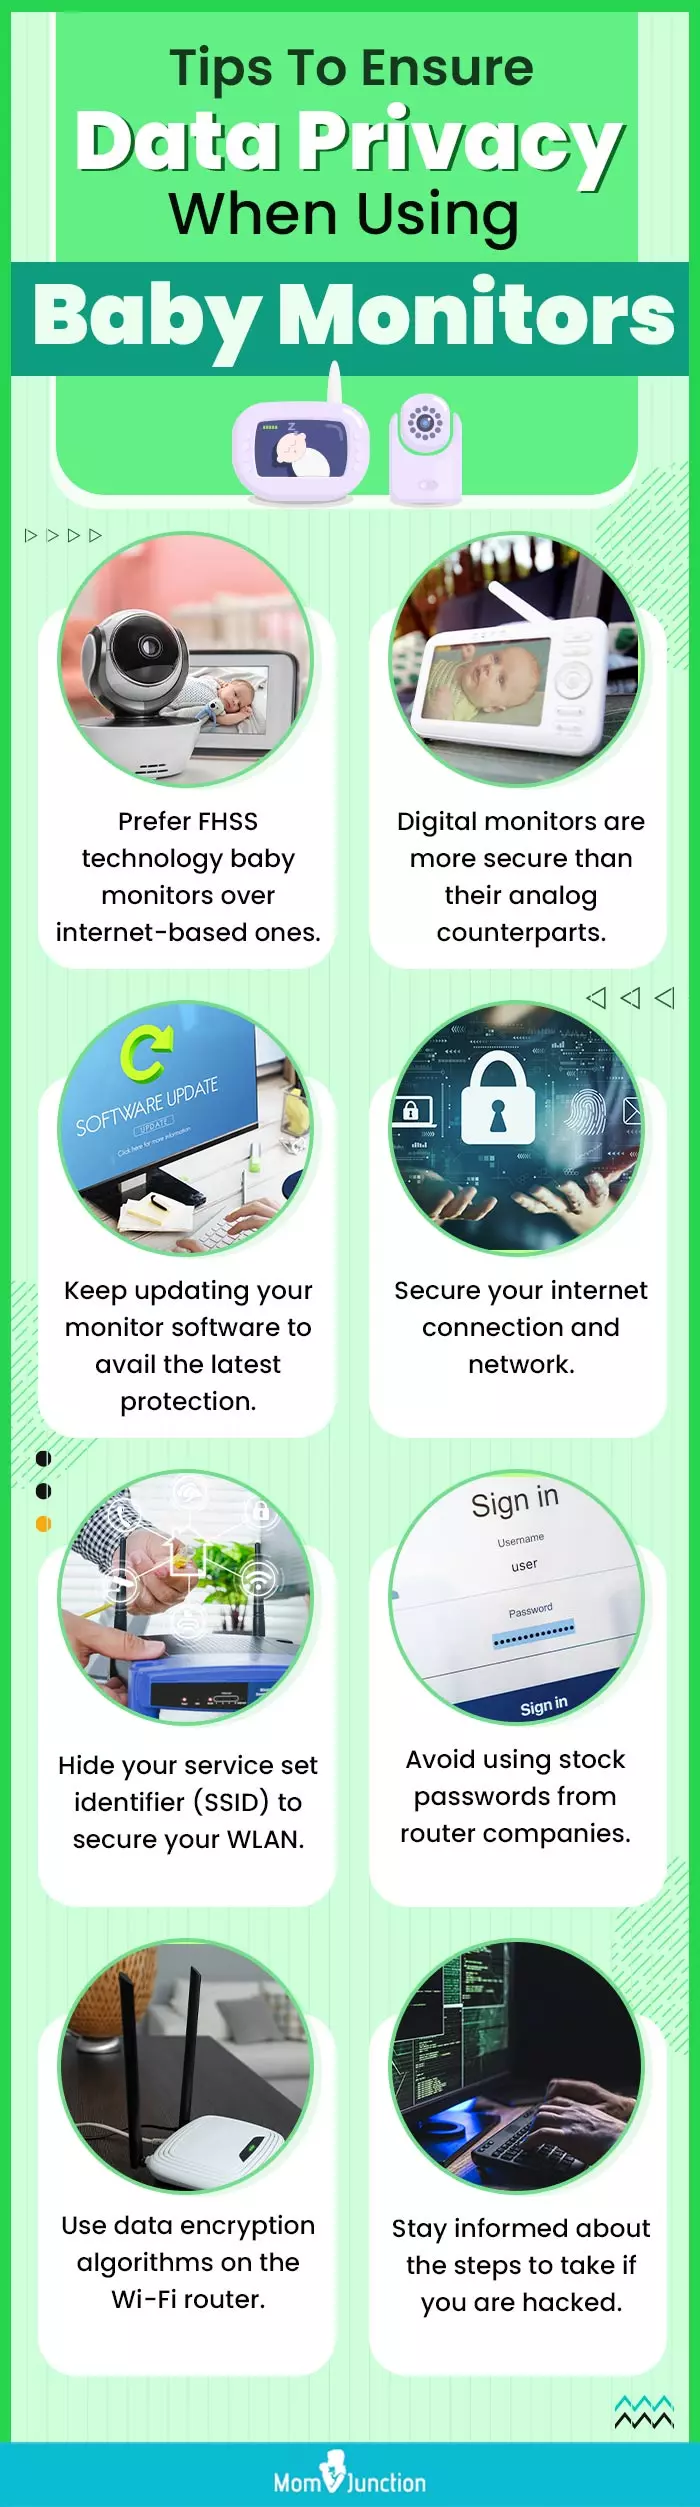 Tips To Ensure Data Privacy When Using Baby Monitors (infographic)